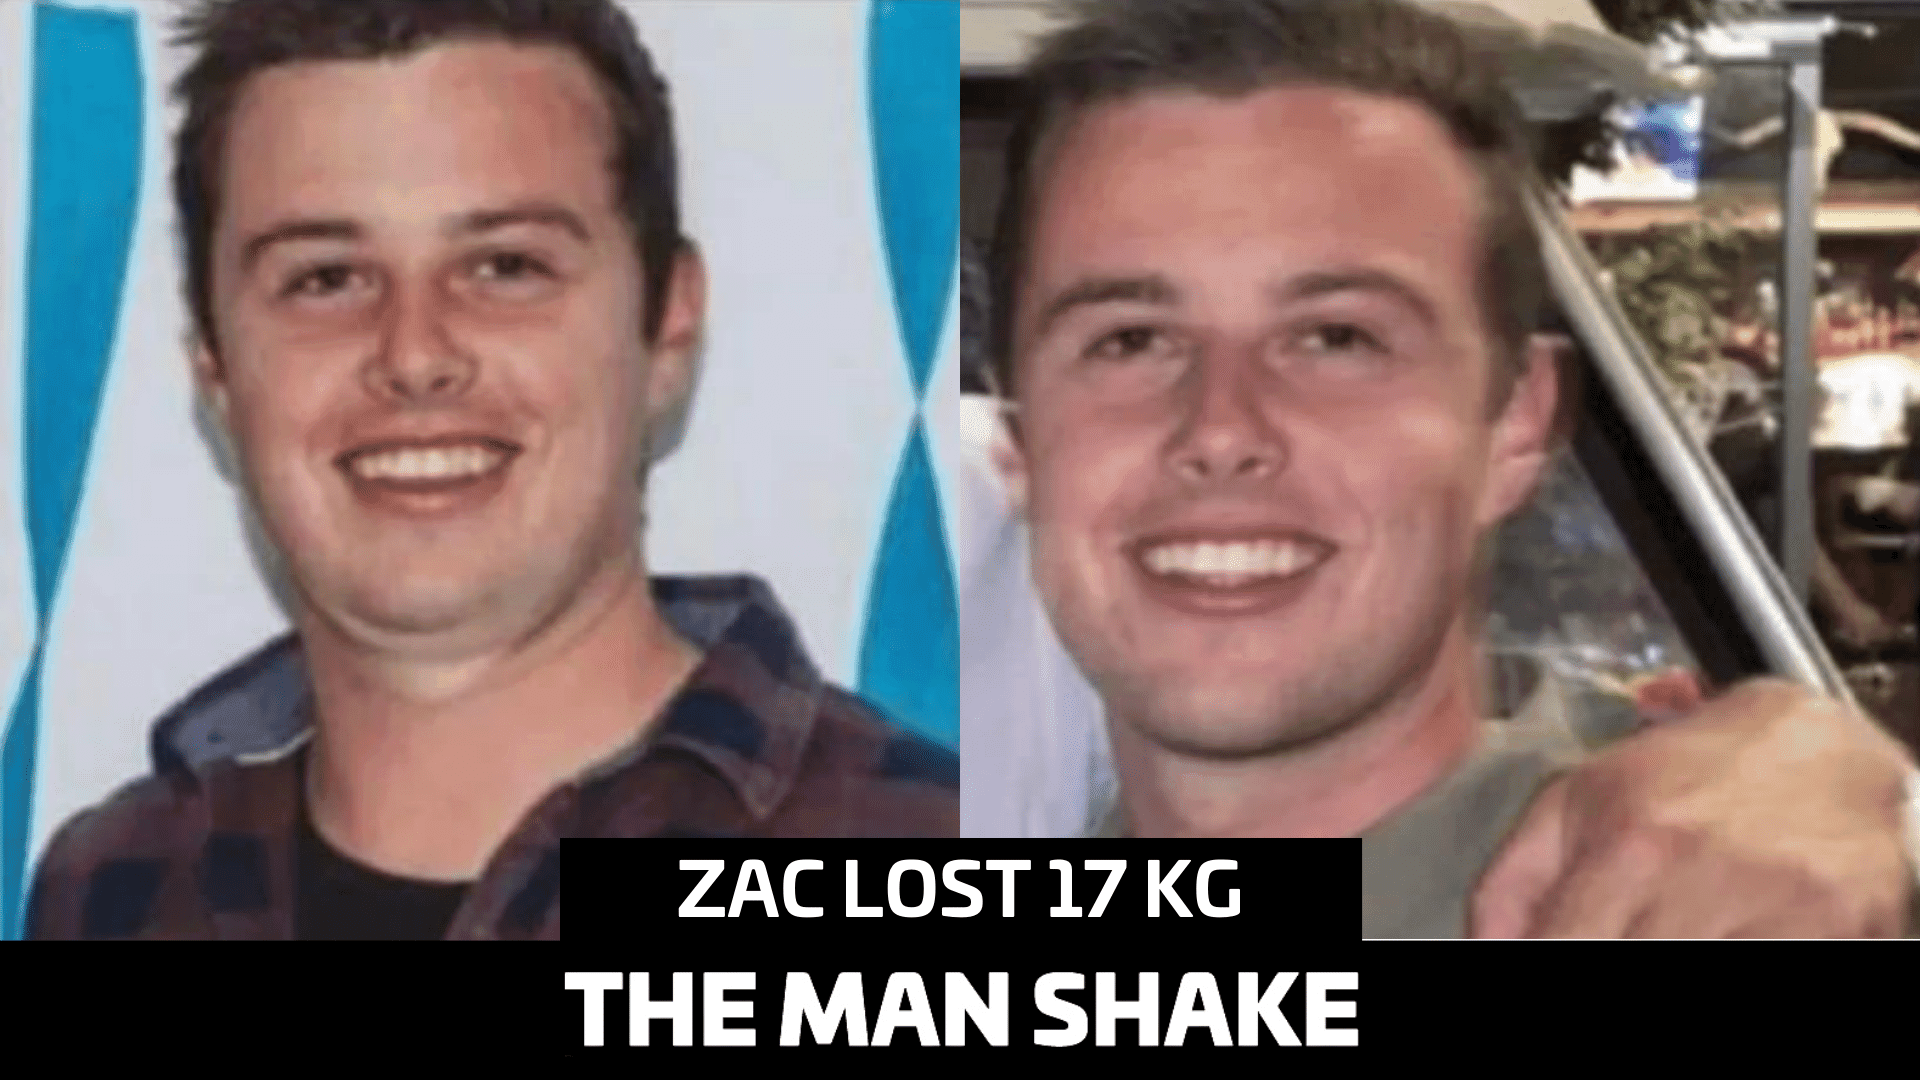 Zac lost 17kg and went from tubby to toned.